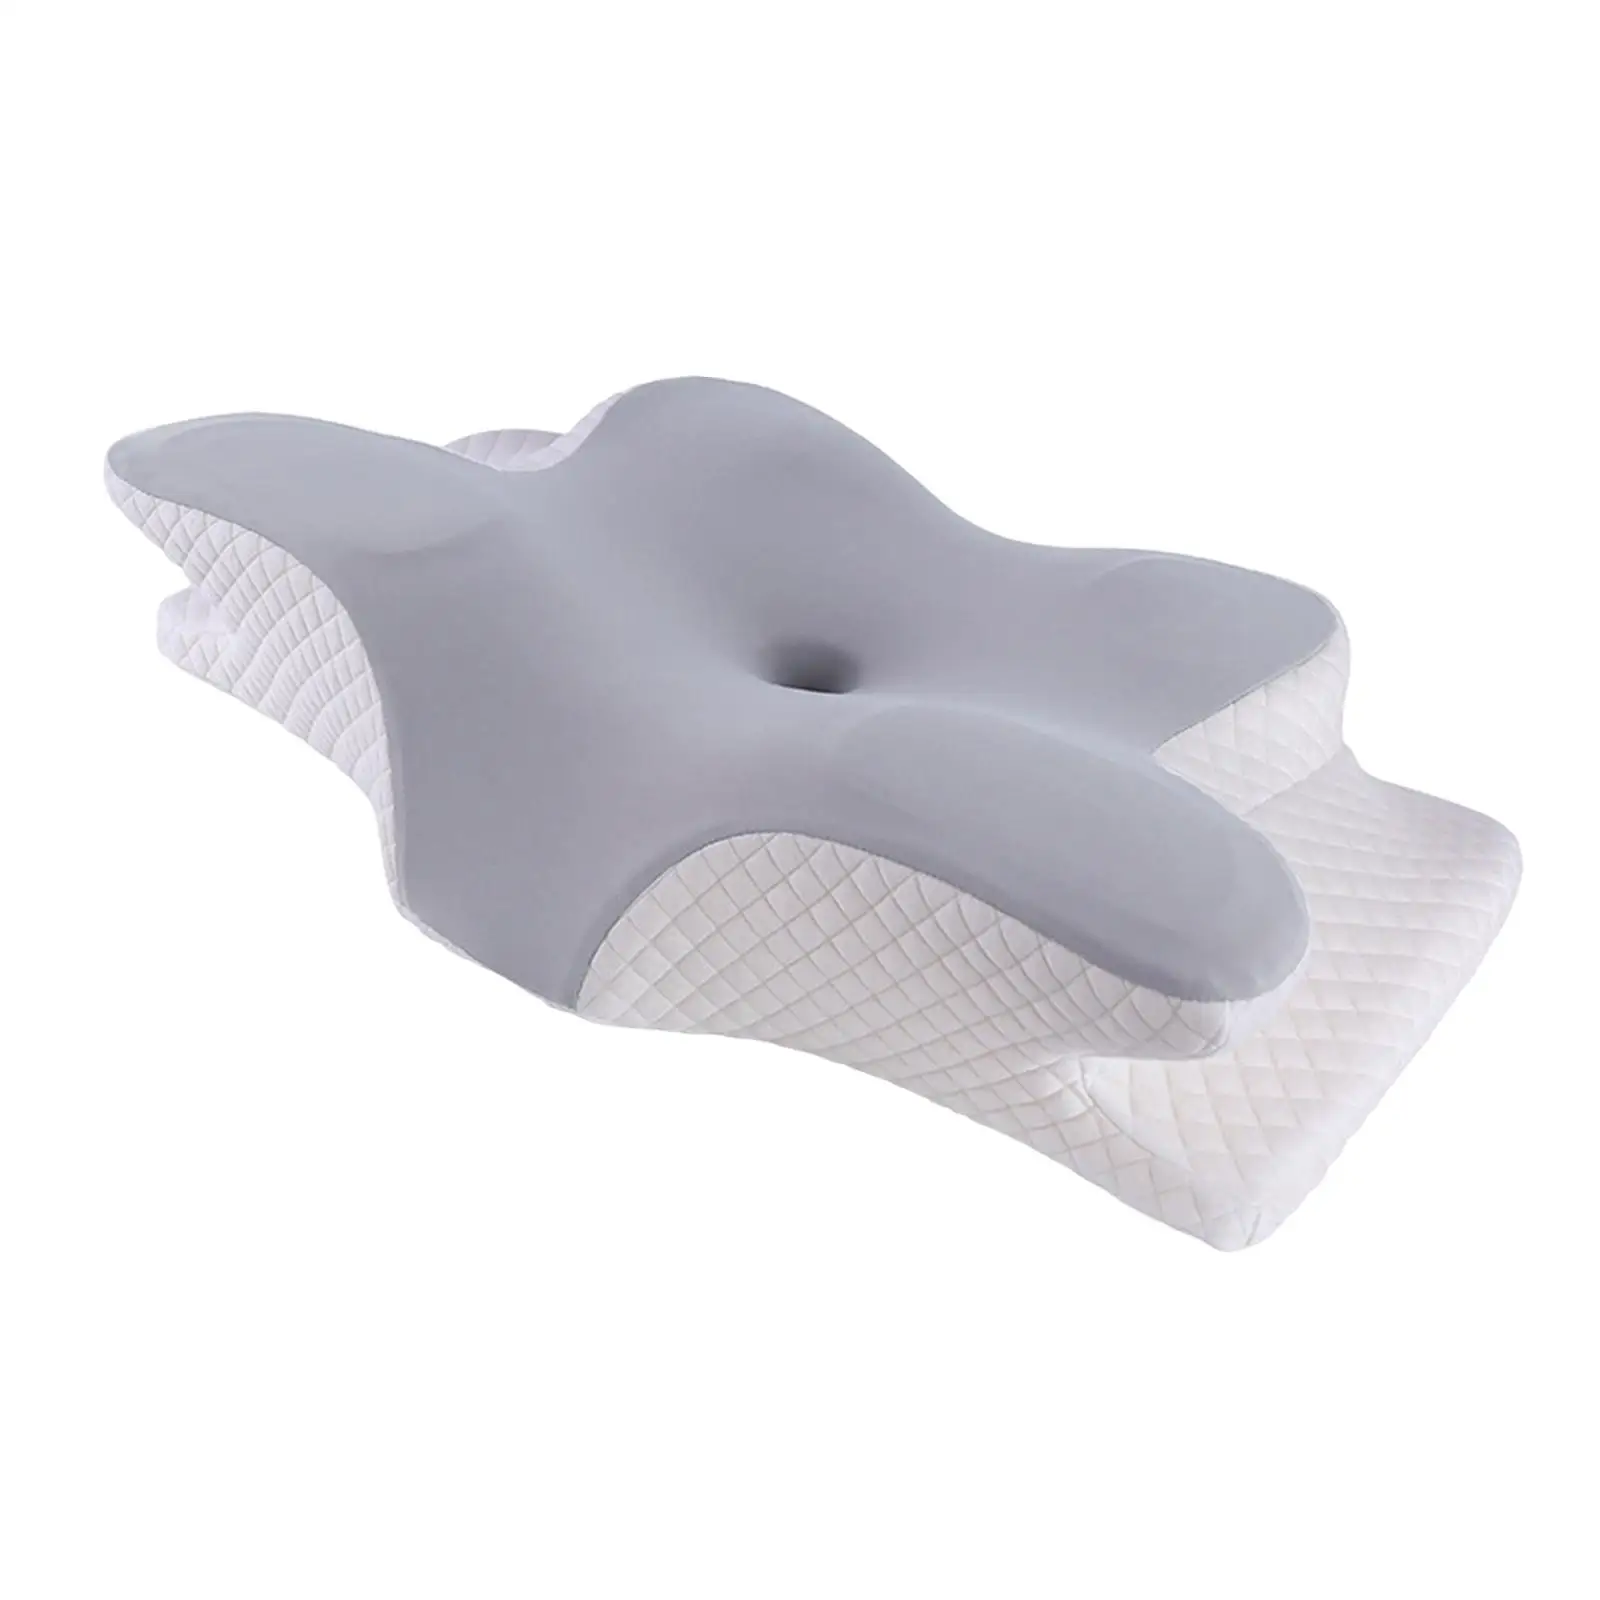 Neck Pillow Memory Foam Pillow Soft for Neck and Shoulder Relief Hollow Design